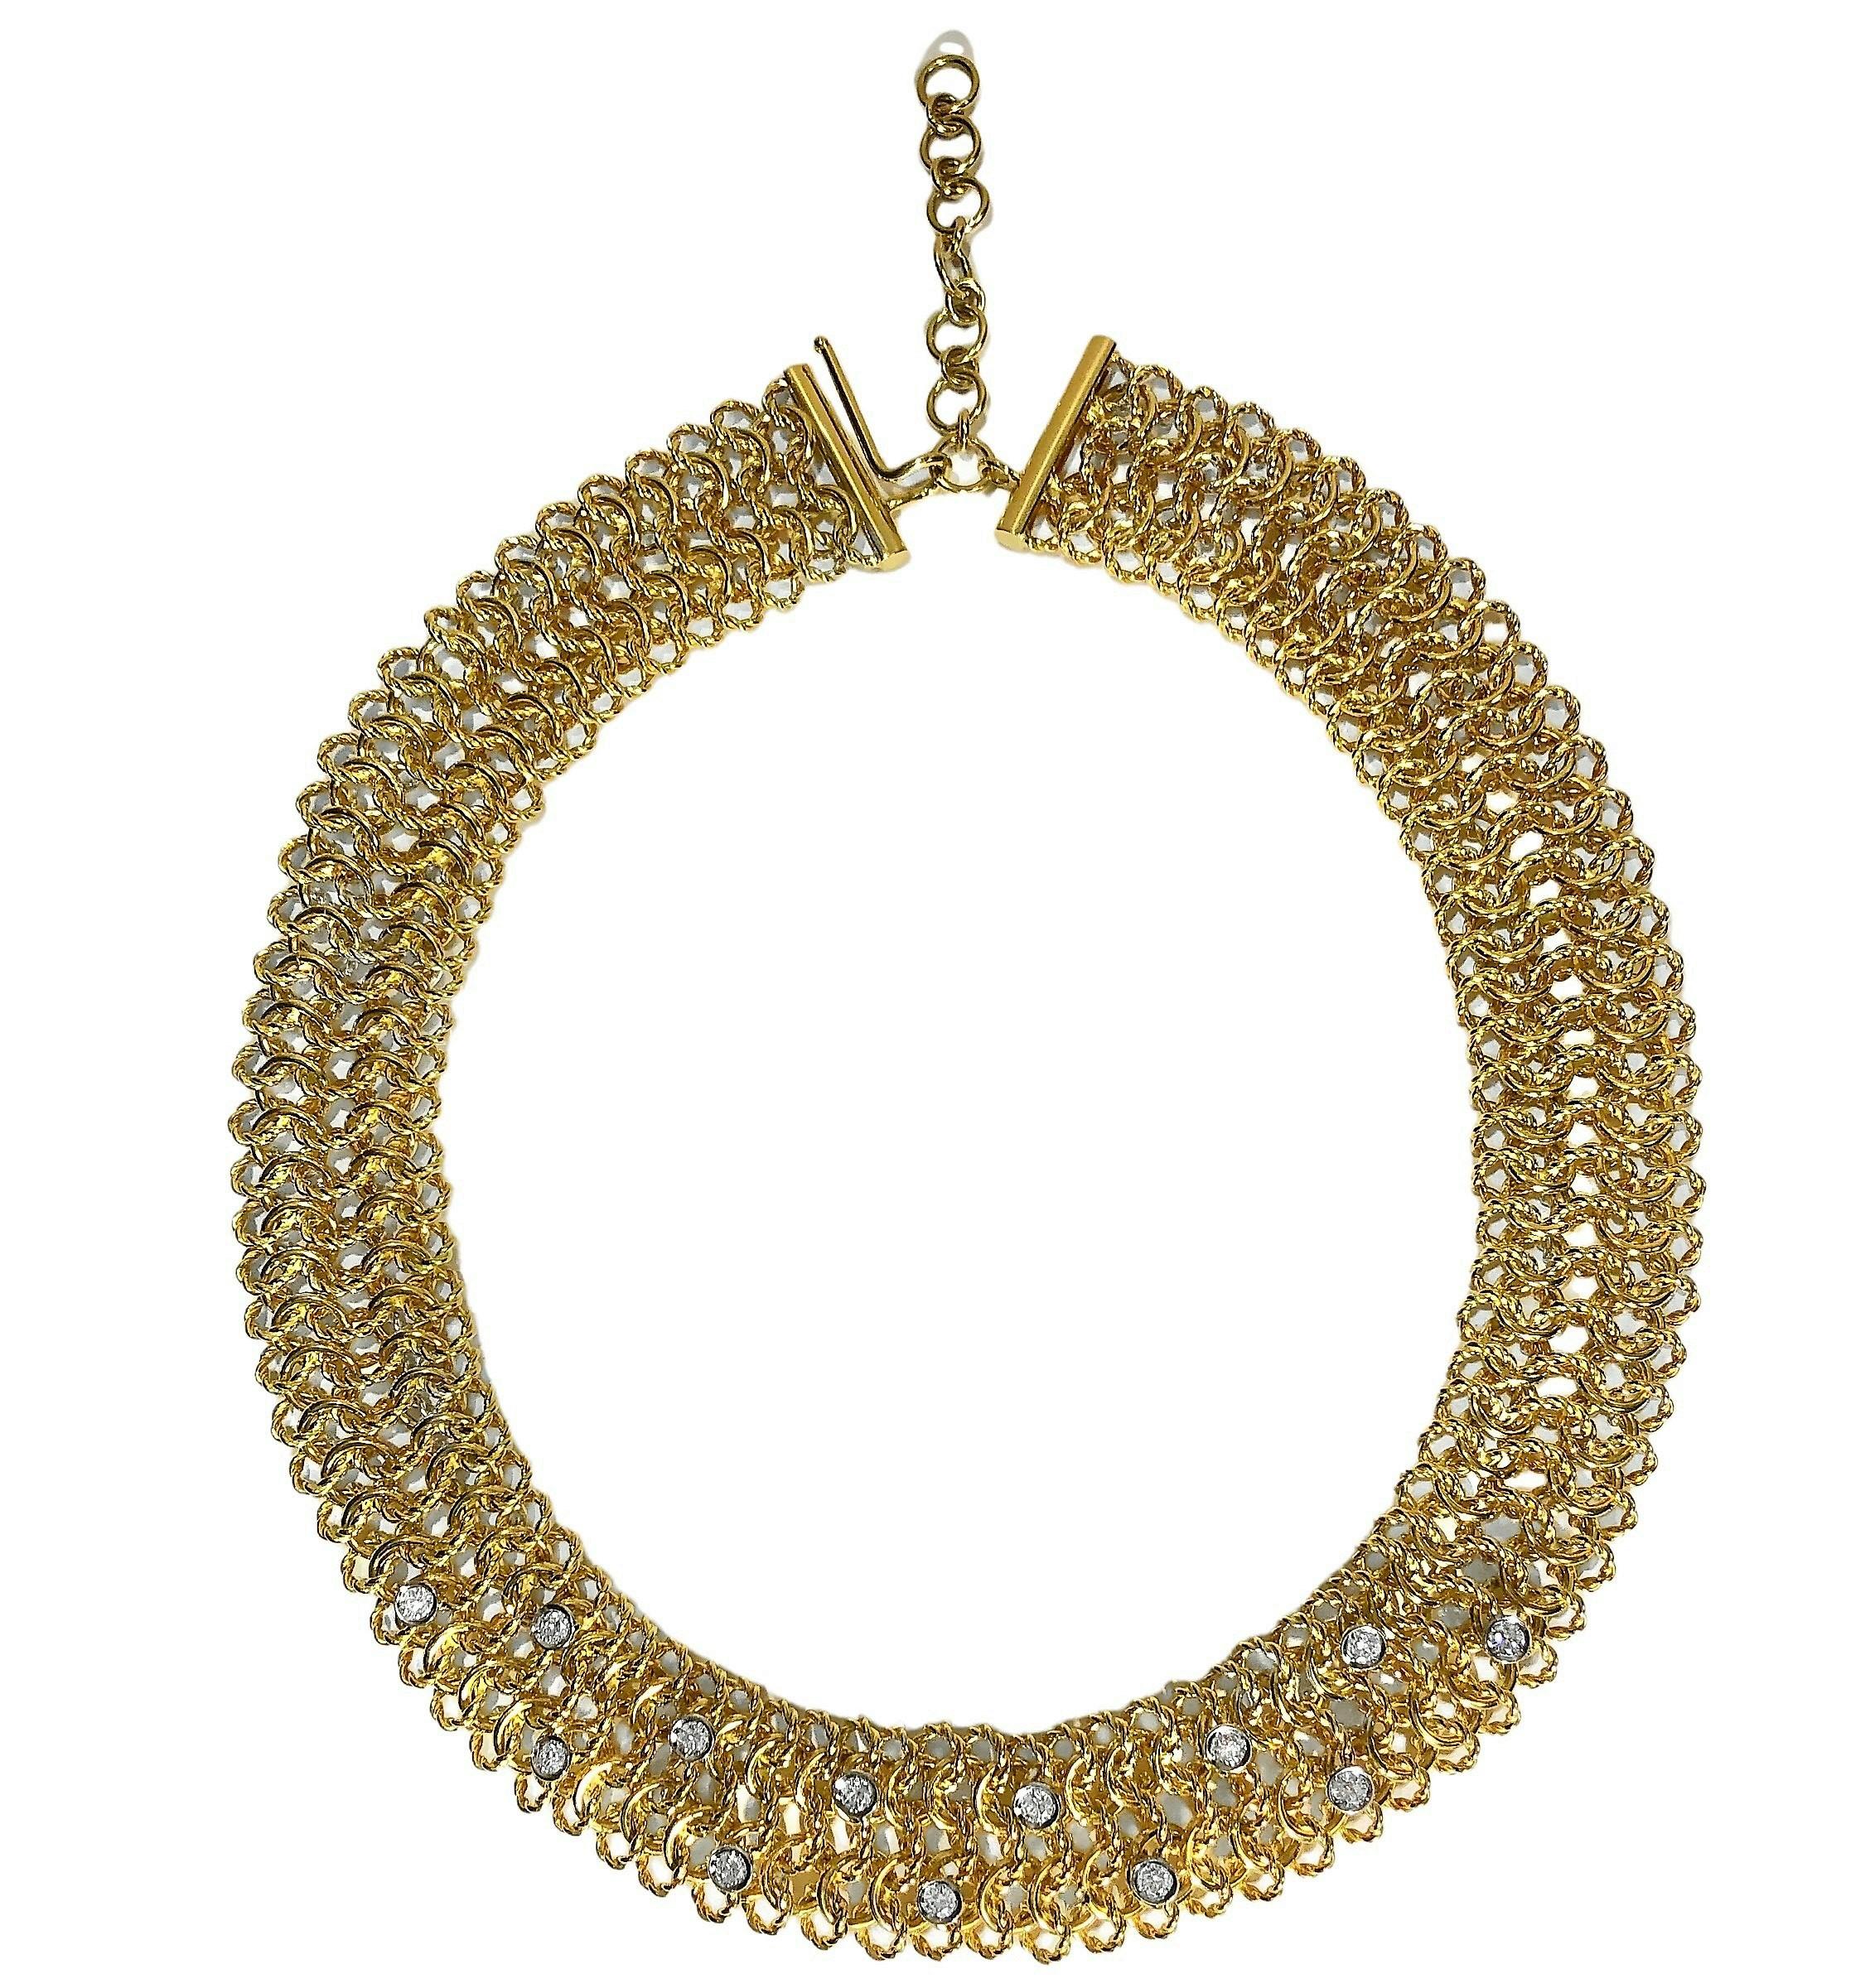 This very dimensional and wide Italian mesh necklace adjusts for wear from 16 inches to 18 inches in length and has a uniform width of 7/8 inches. The necklace is a very artfully done single length of intertwined high polish and rope textured 18k